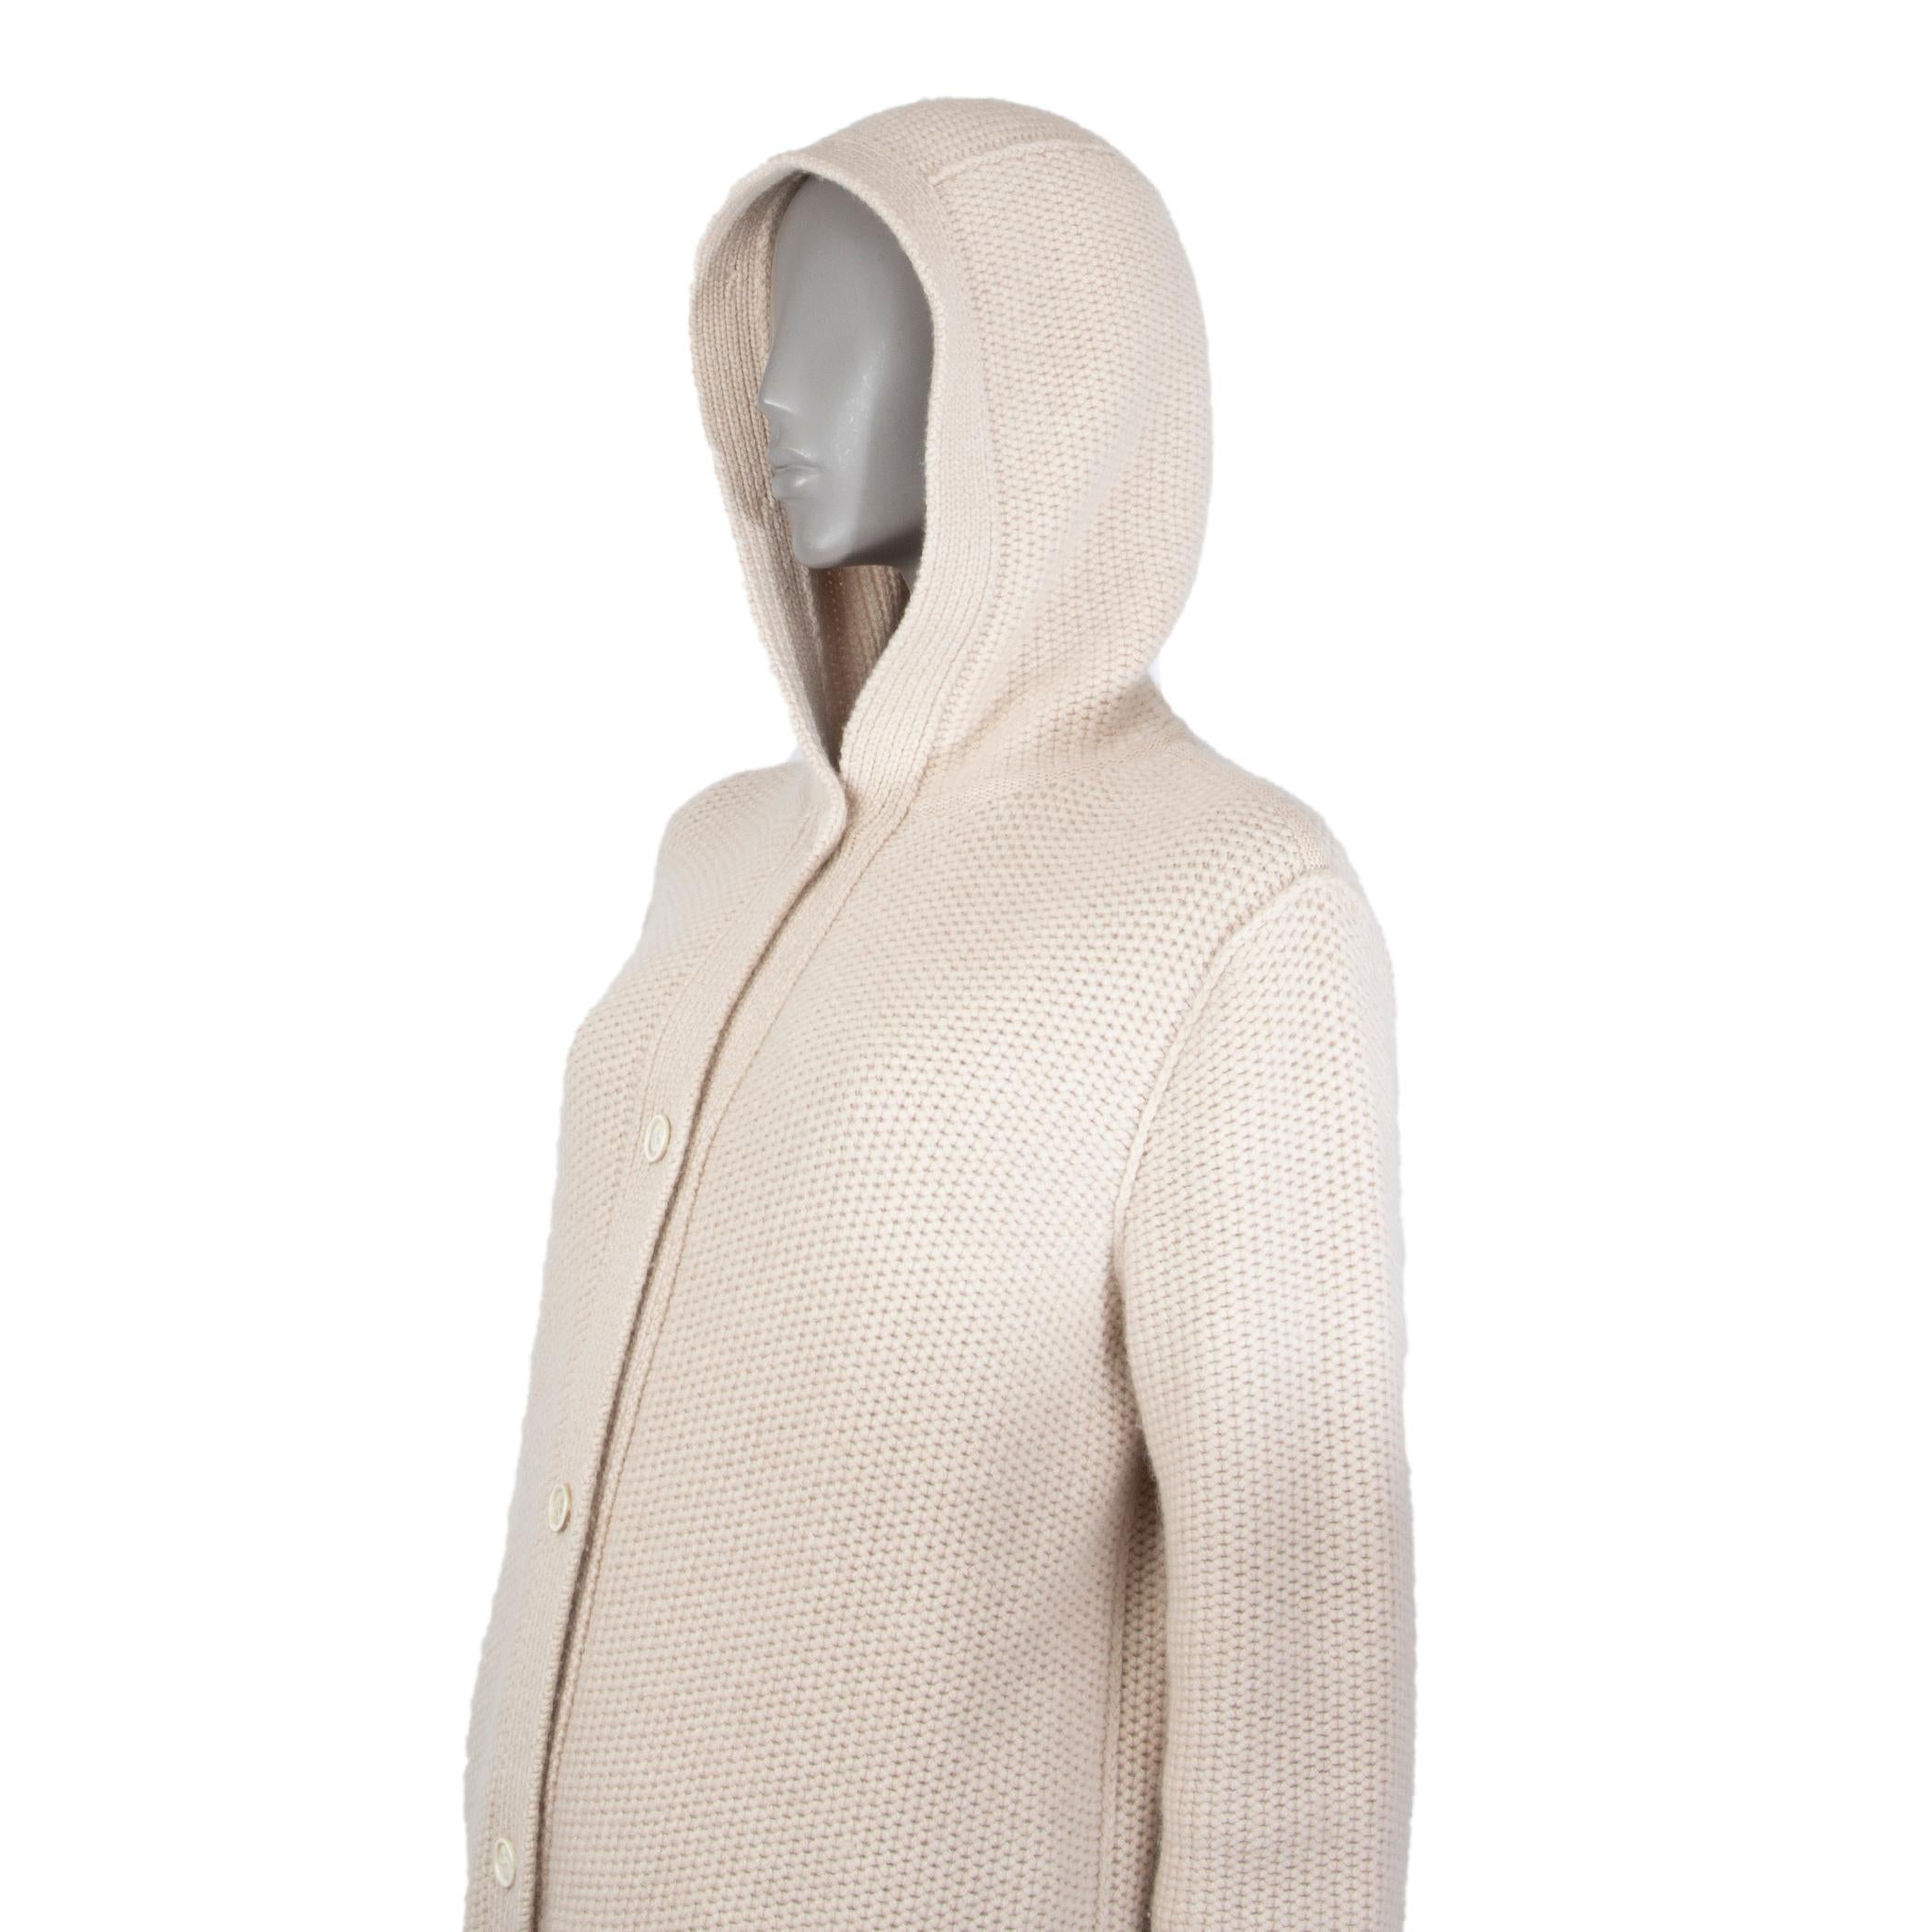 LORO PIANA sand beige cashmere HOODED KNIT Coat Jacket 46 XL In Excellent Condition For Sale In Zürich, CH